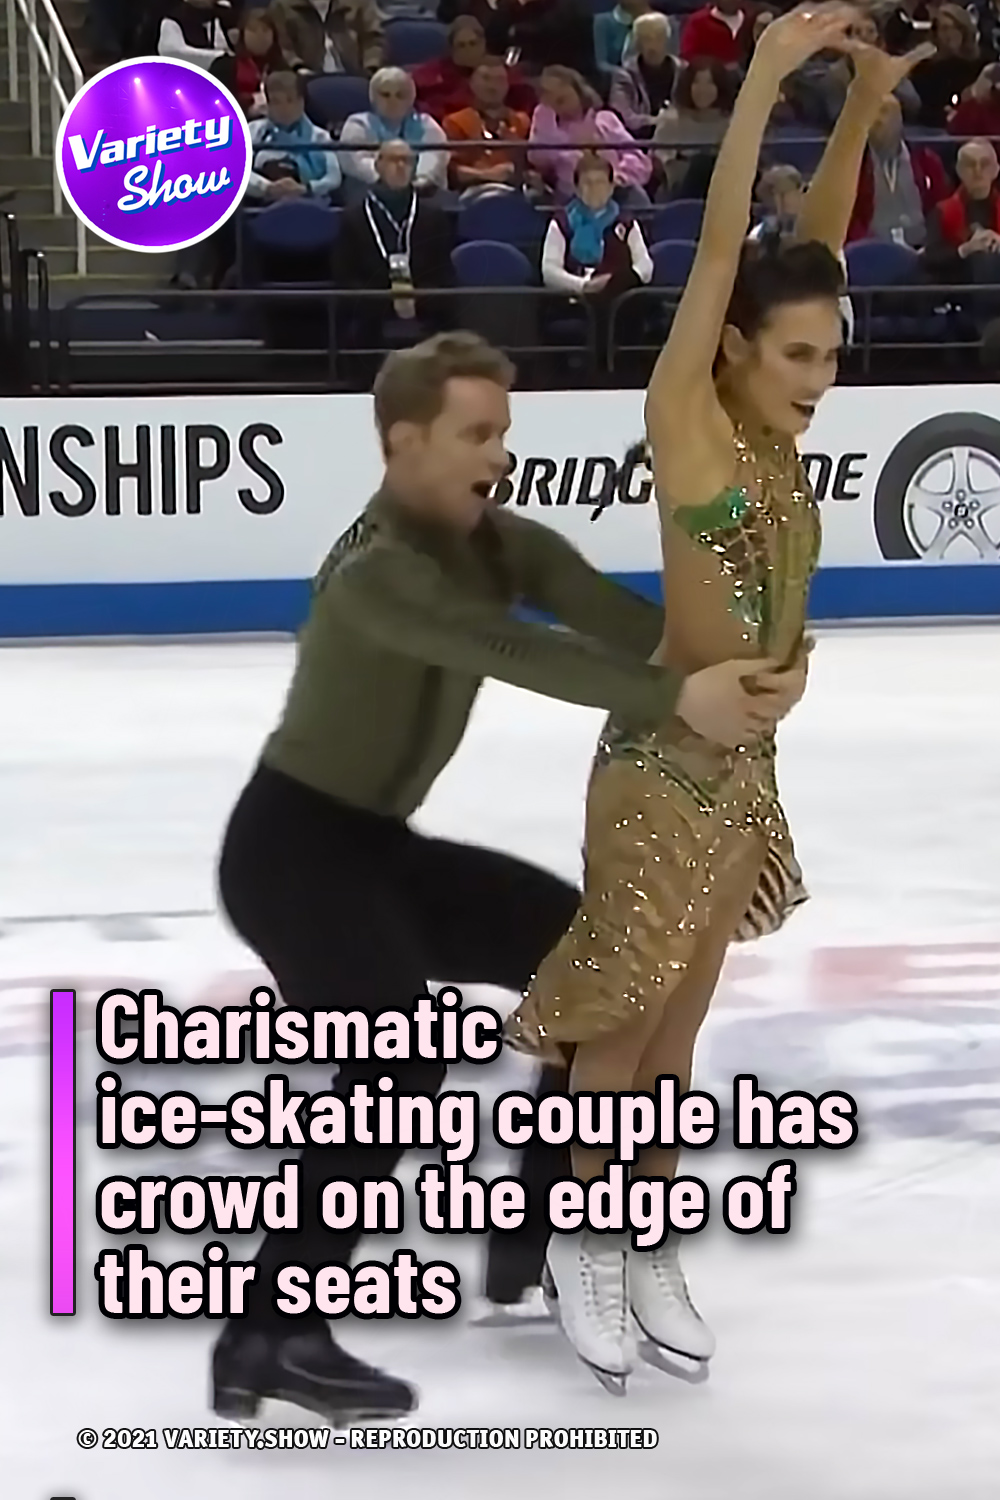 Charismatic ice-skating couple has crowd on the edge of their seats